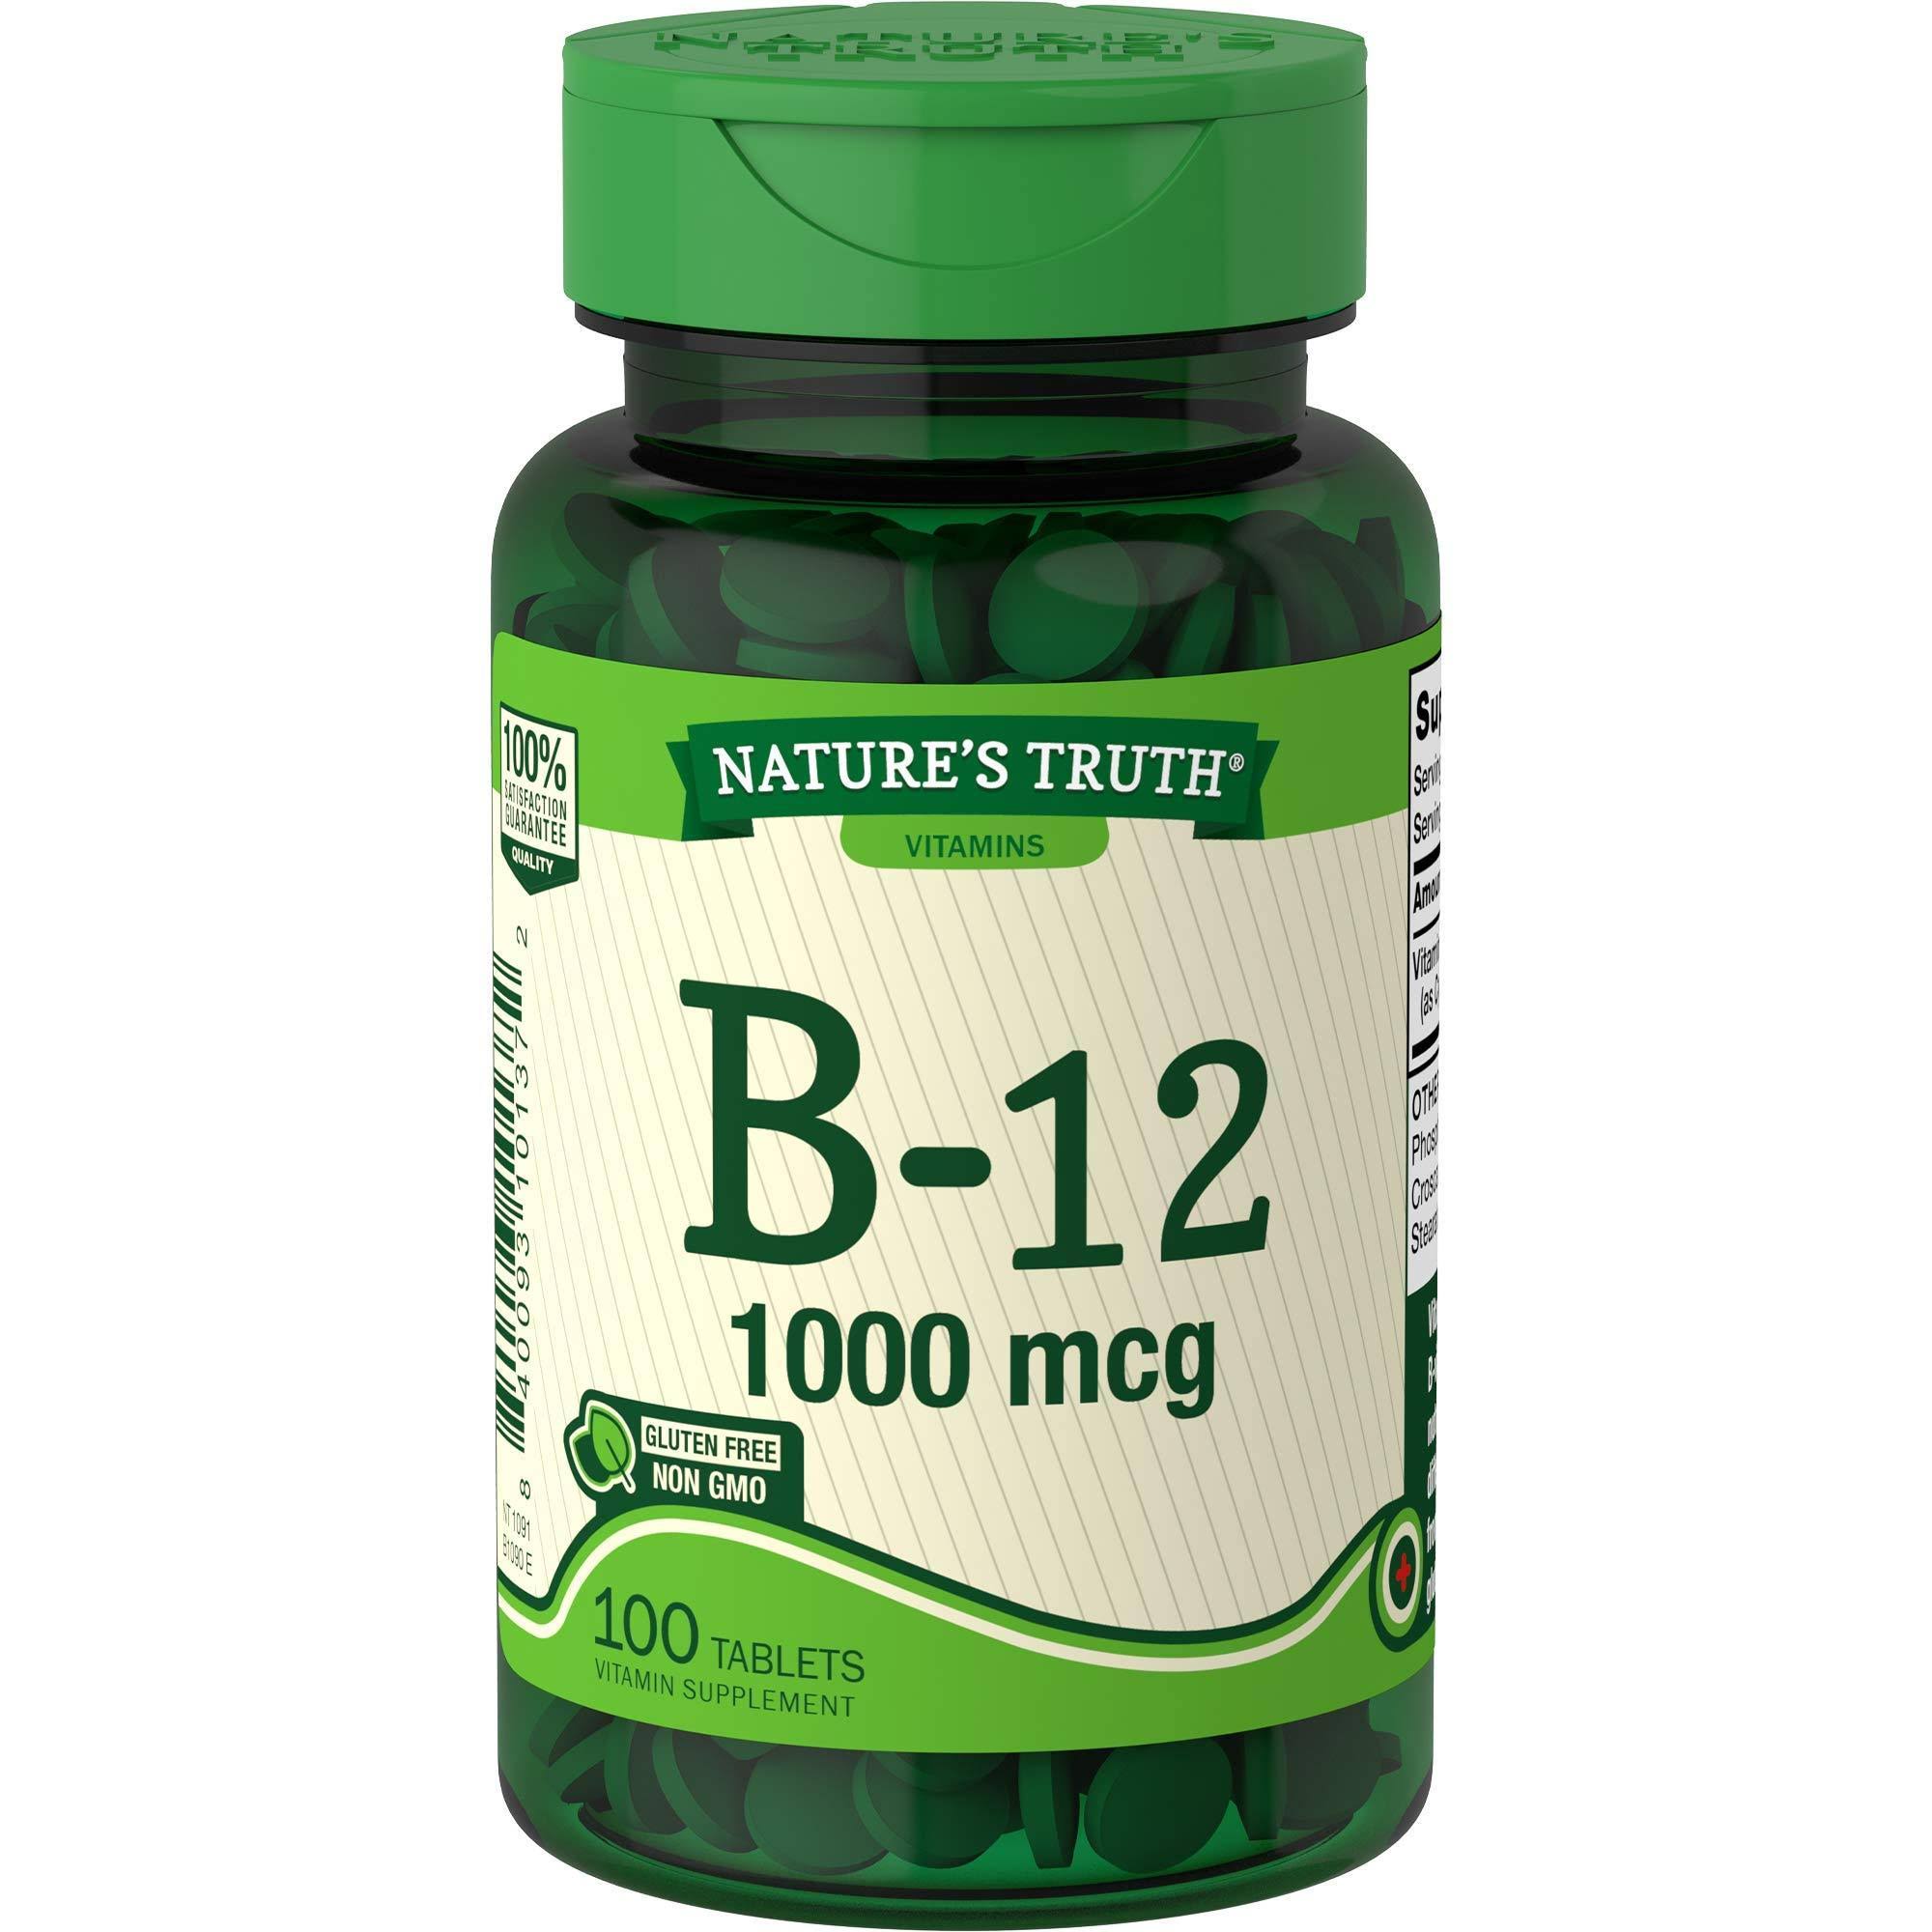 Nature's Truth B-12 1000 mcg, 100 Count (3)